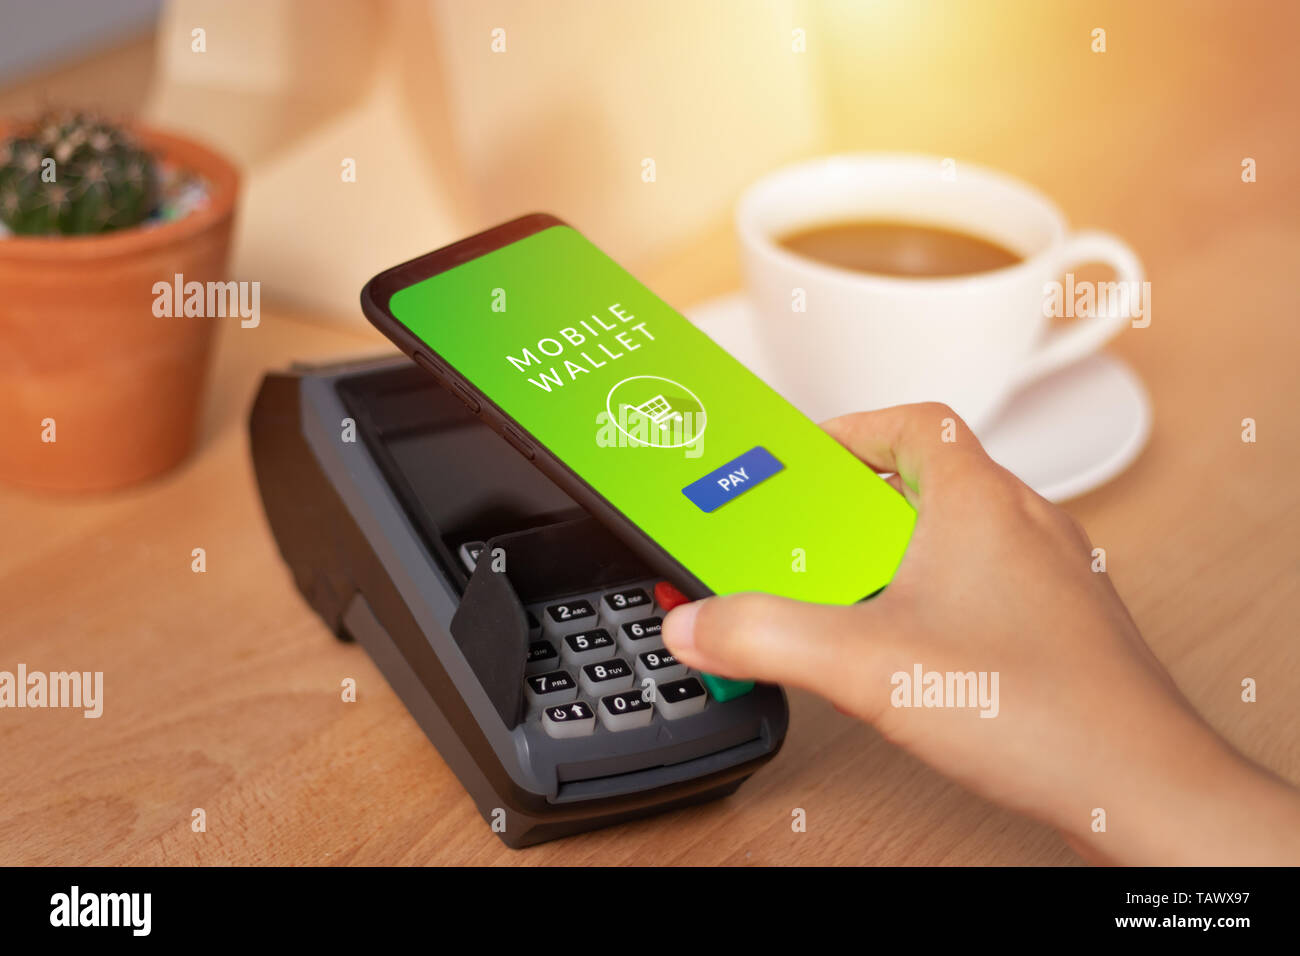 cashless Society, customer paying bill through smartphone using NFC technology in cafe. mobile digital wallet technology concept Stock Photo